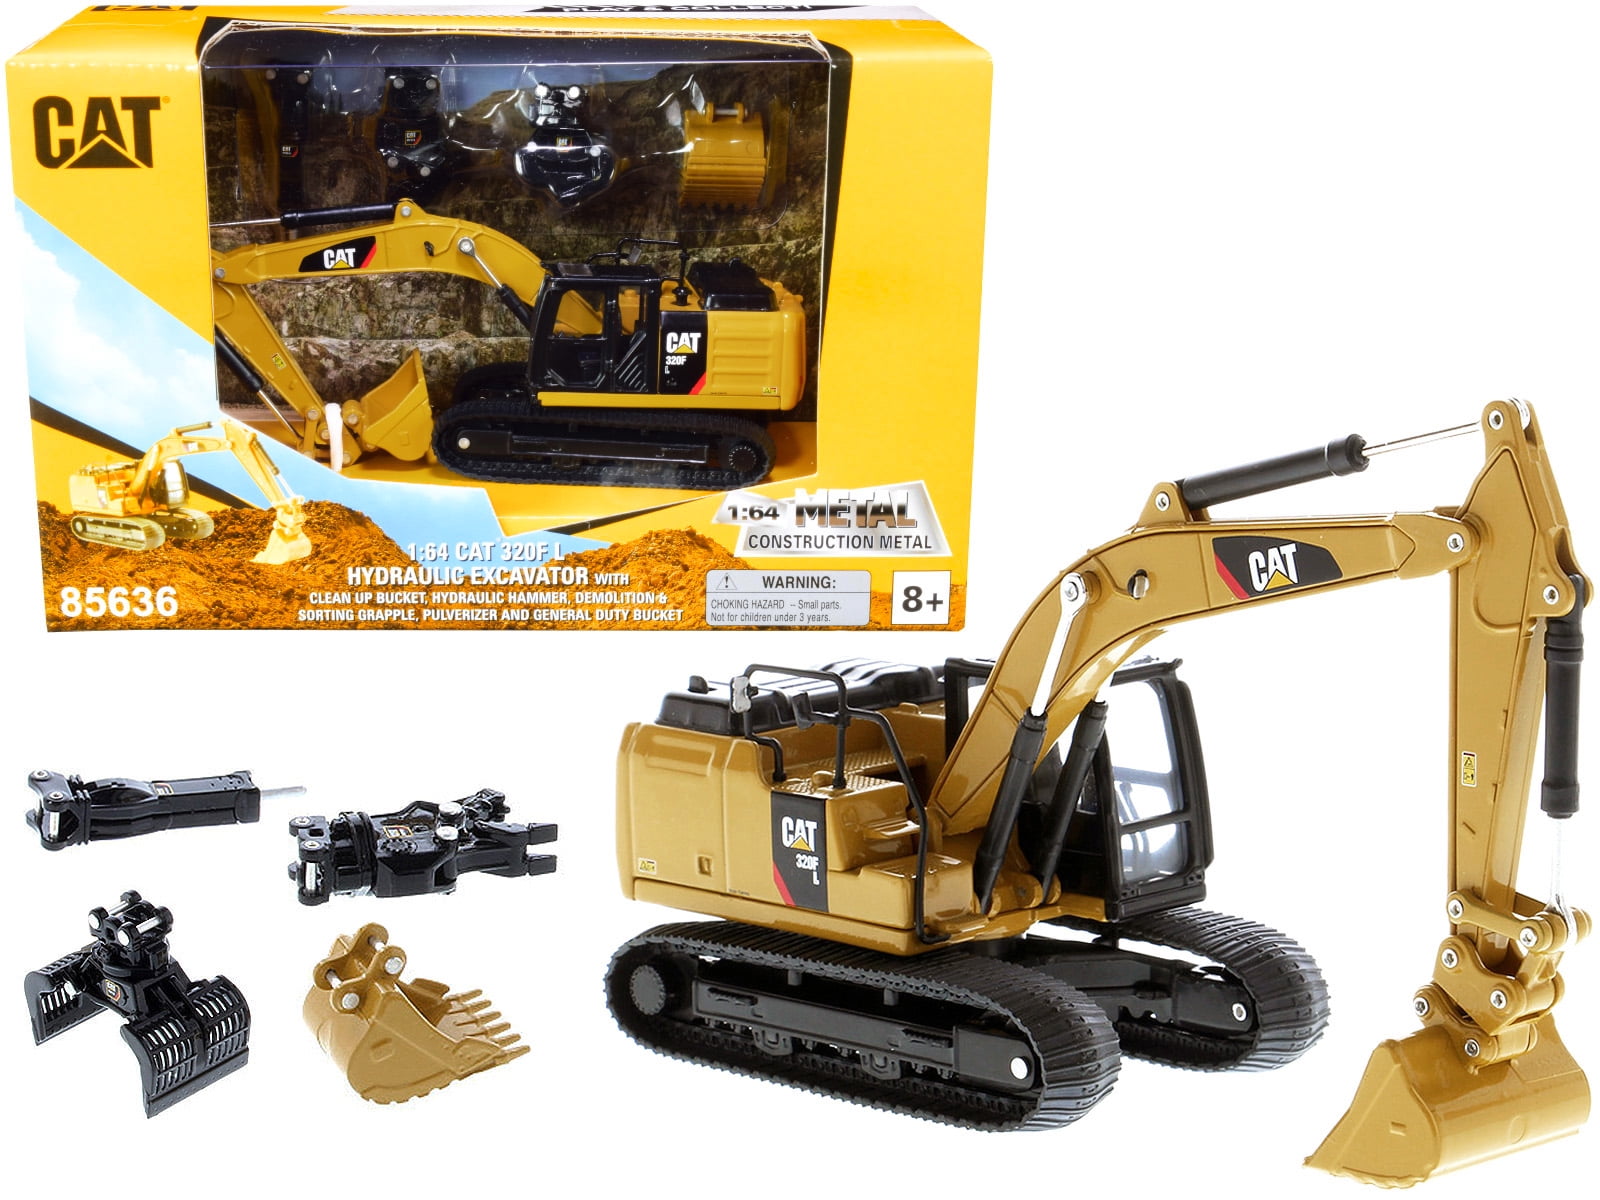 CAT Caterpillar 320f L Hydraulic Excavator 1/64 Model by Diecast Masters 85606 for sale online 